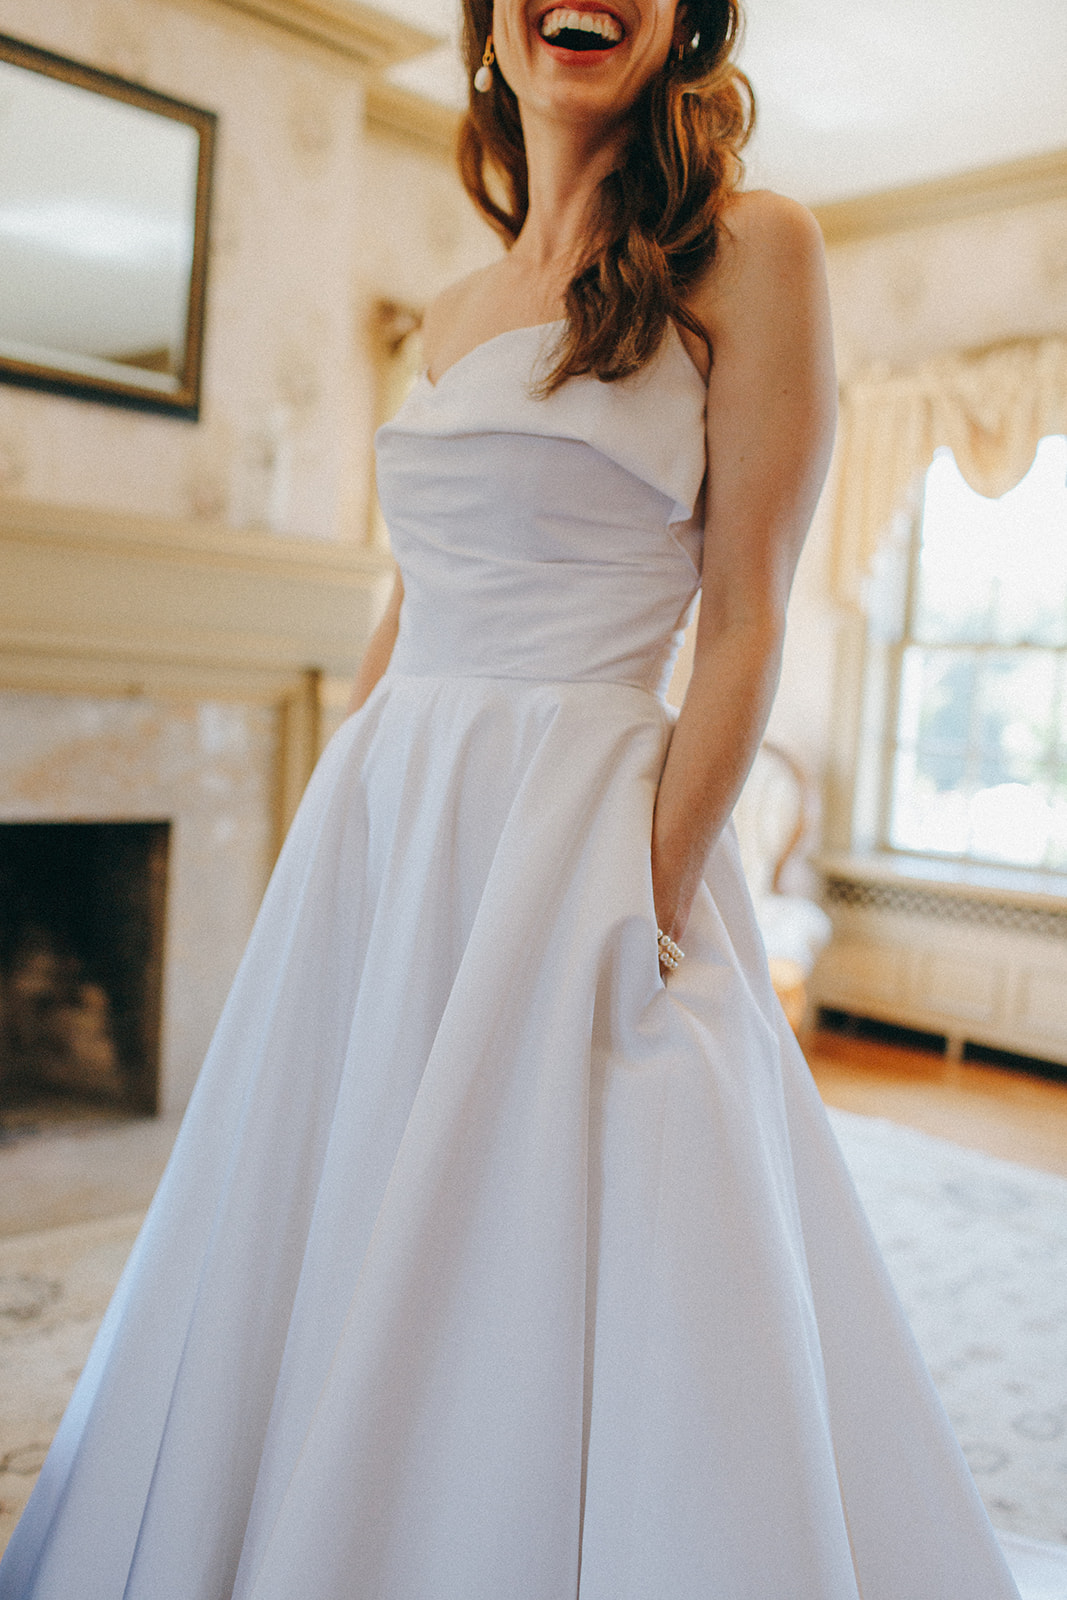 A bride laughs in her Sarah Seven gown in the bridal suite of the Felt Mansion